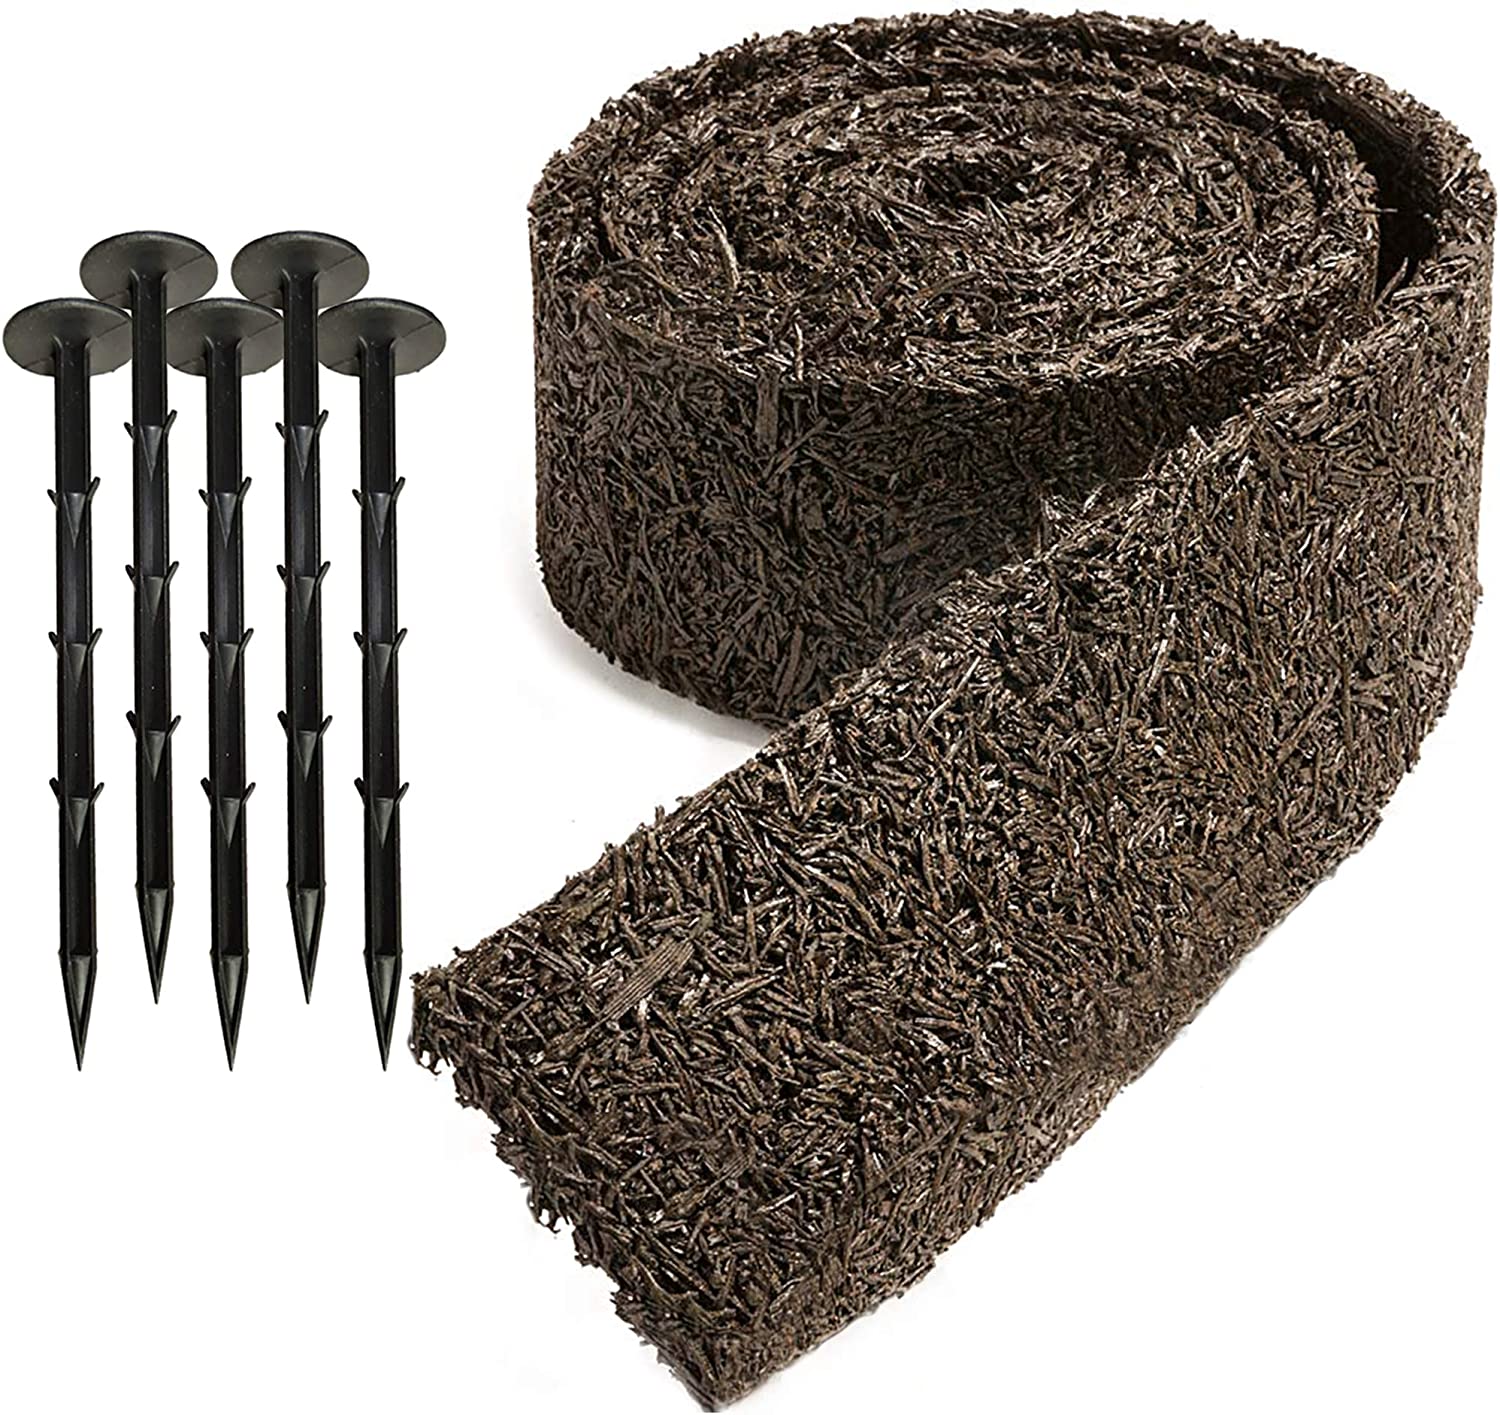 Black Rubber Mulch Border for Landscaping, 120” x 4.5” [...]